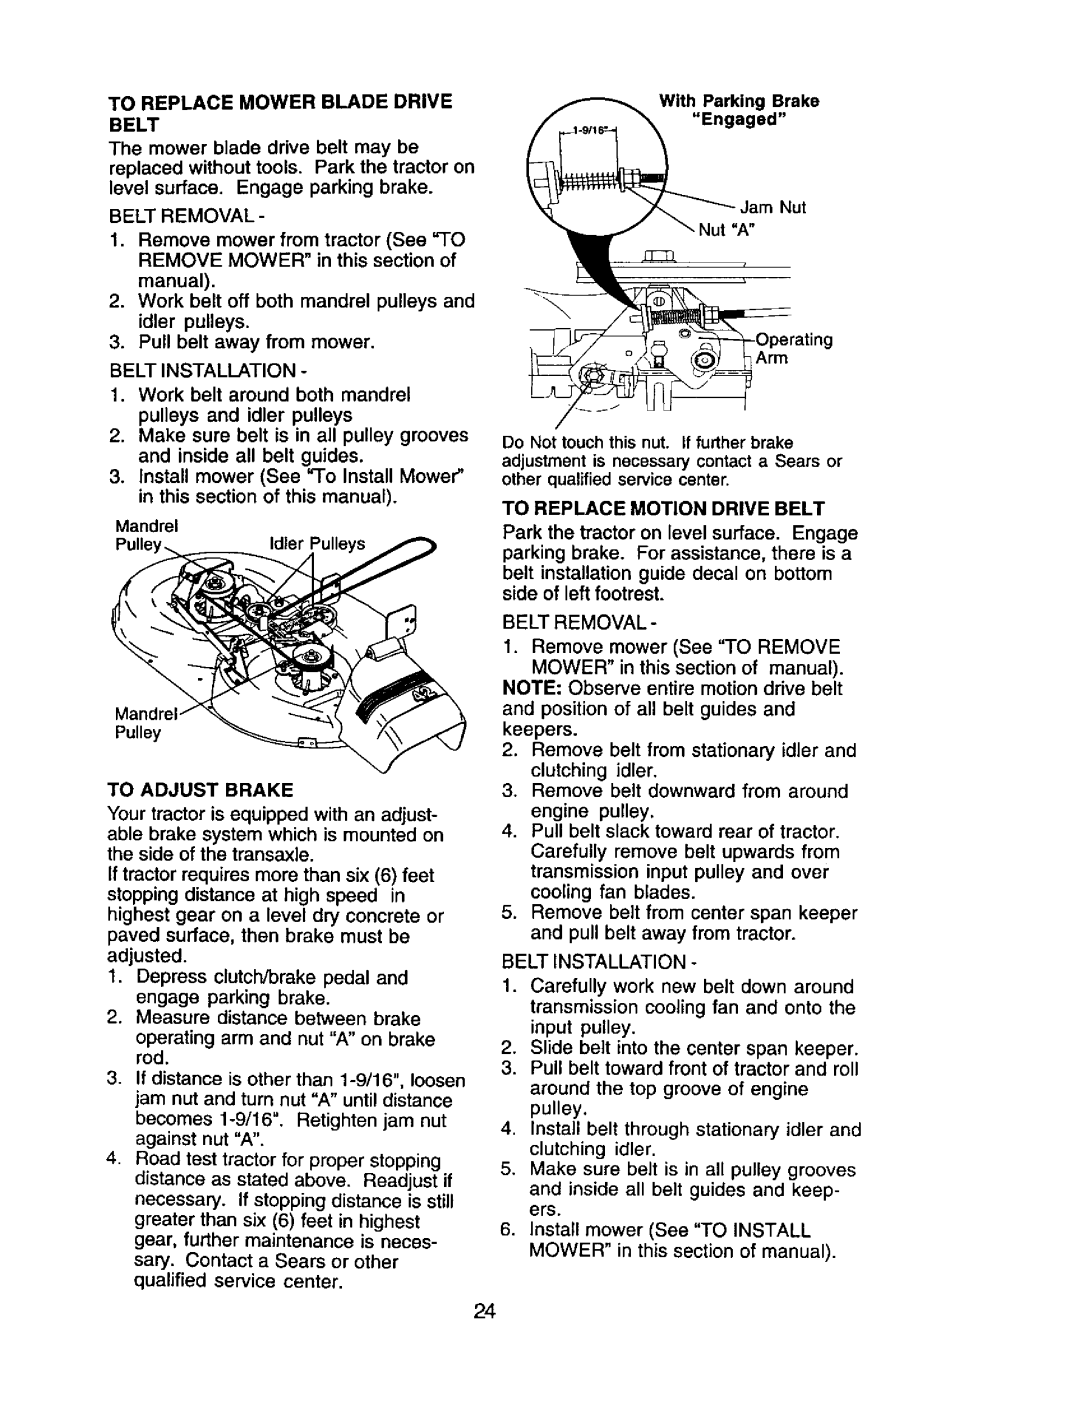 Craftsman 917.272068 owner manual To Replace Mower Blade Drive Belt 